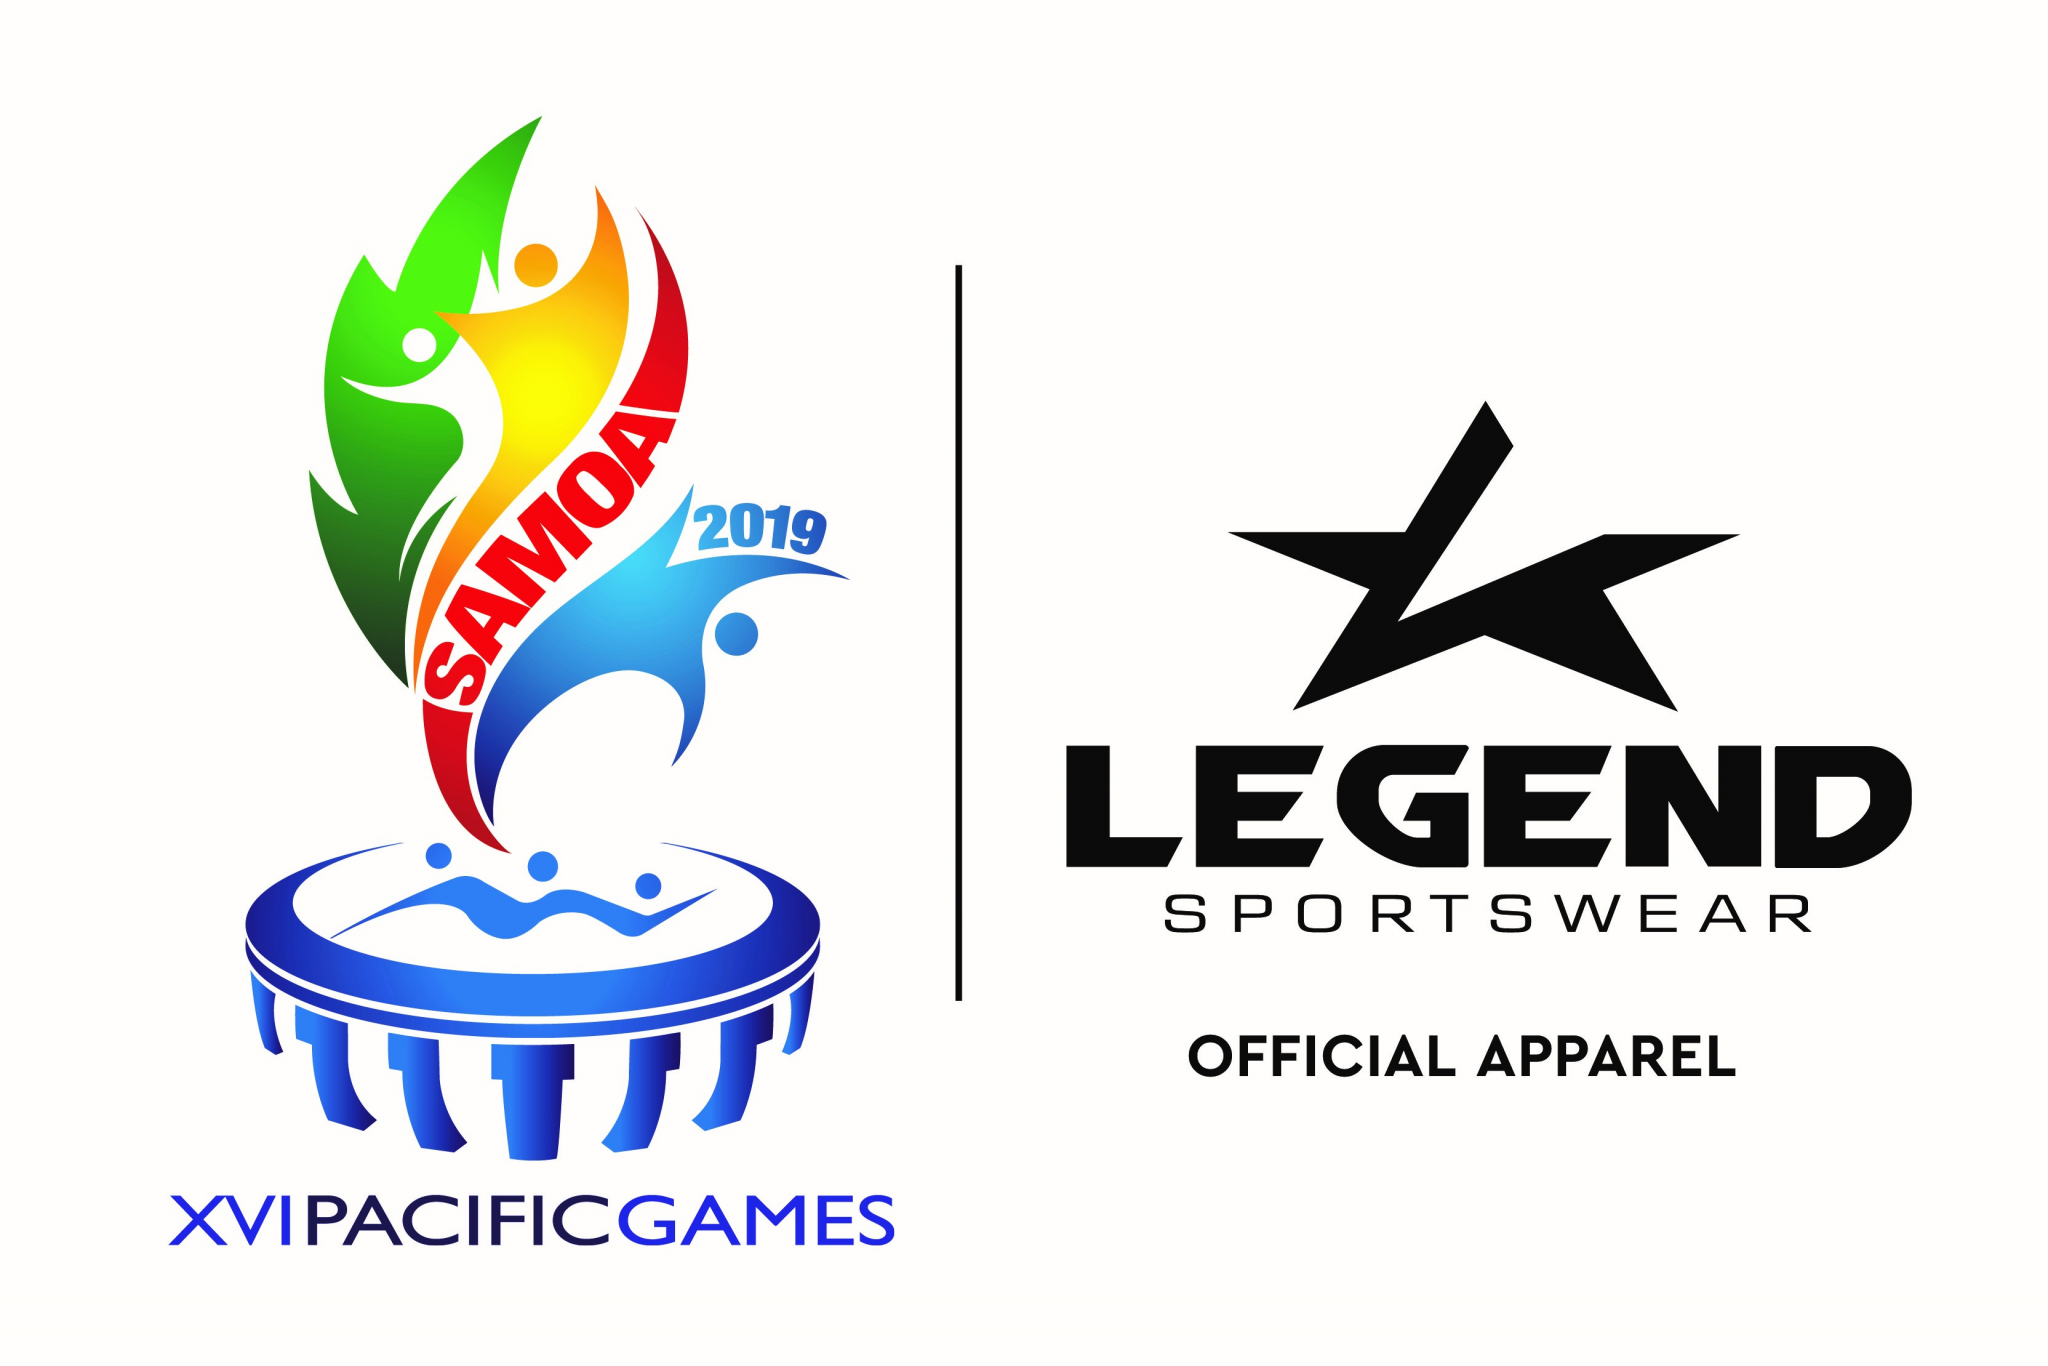 Legend to provide Samoan team kit at Pacific Games